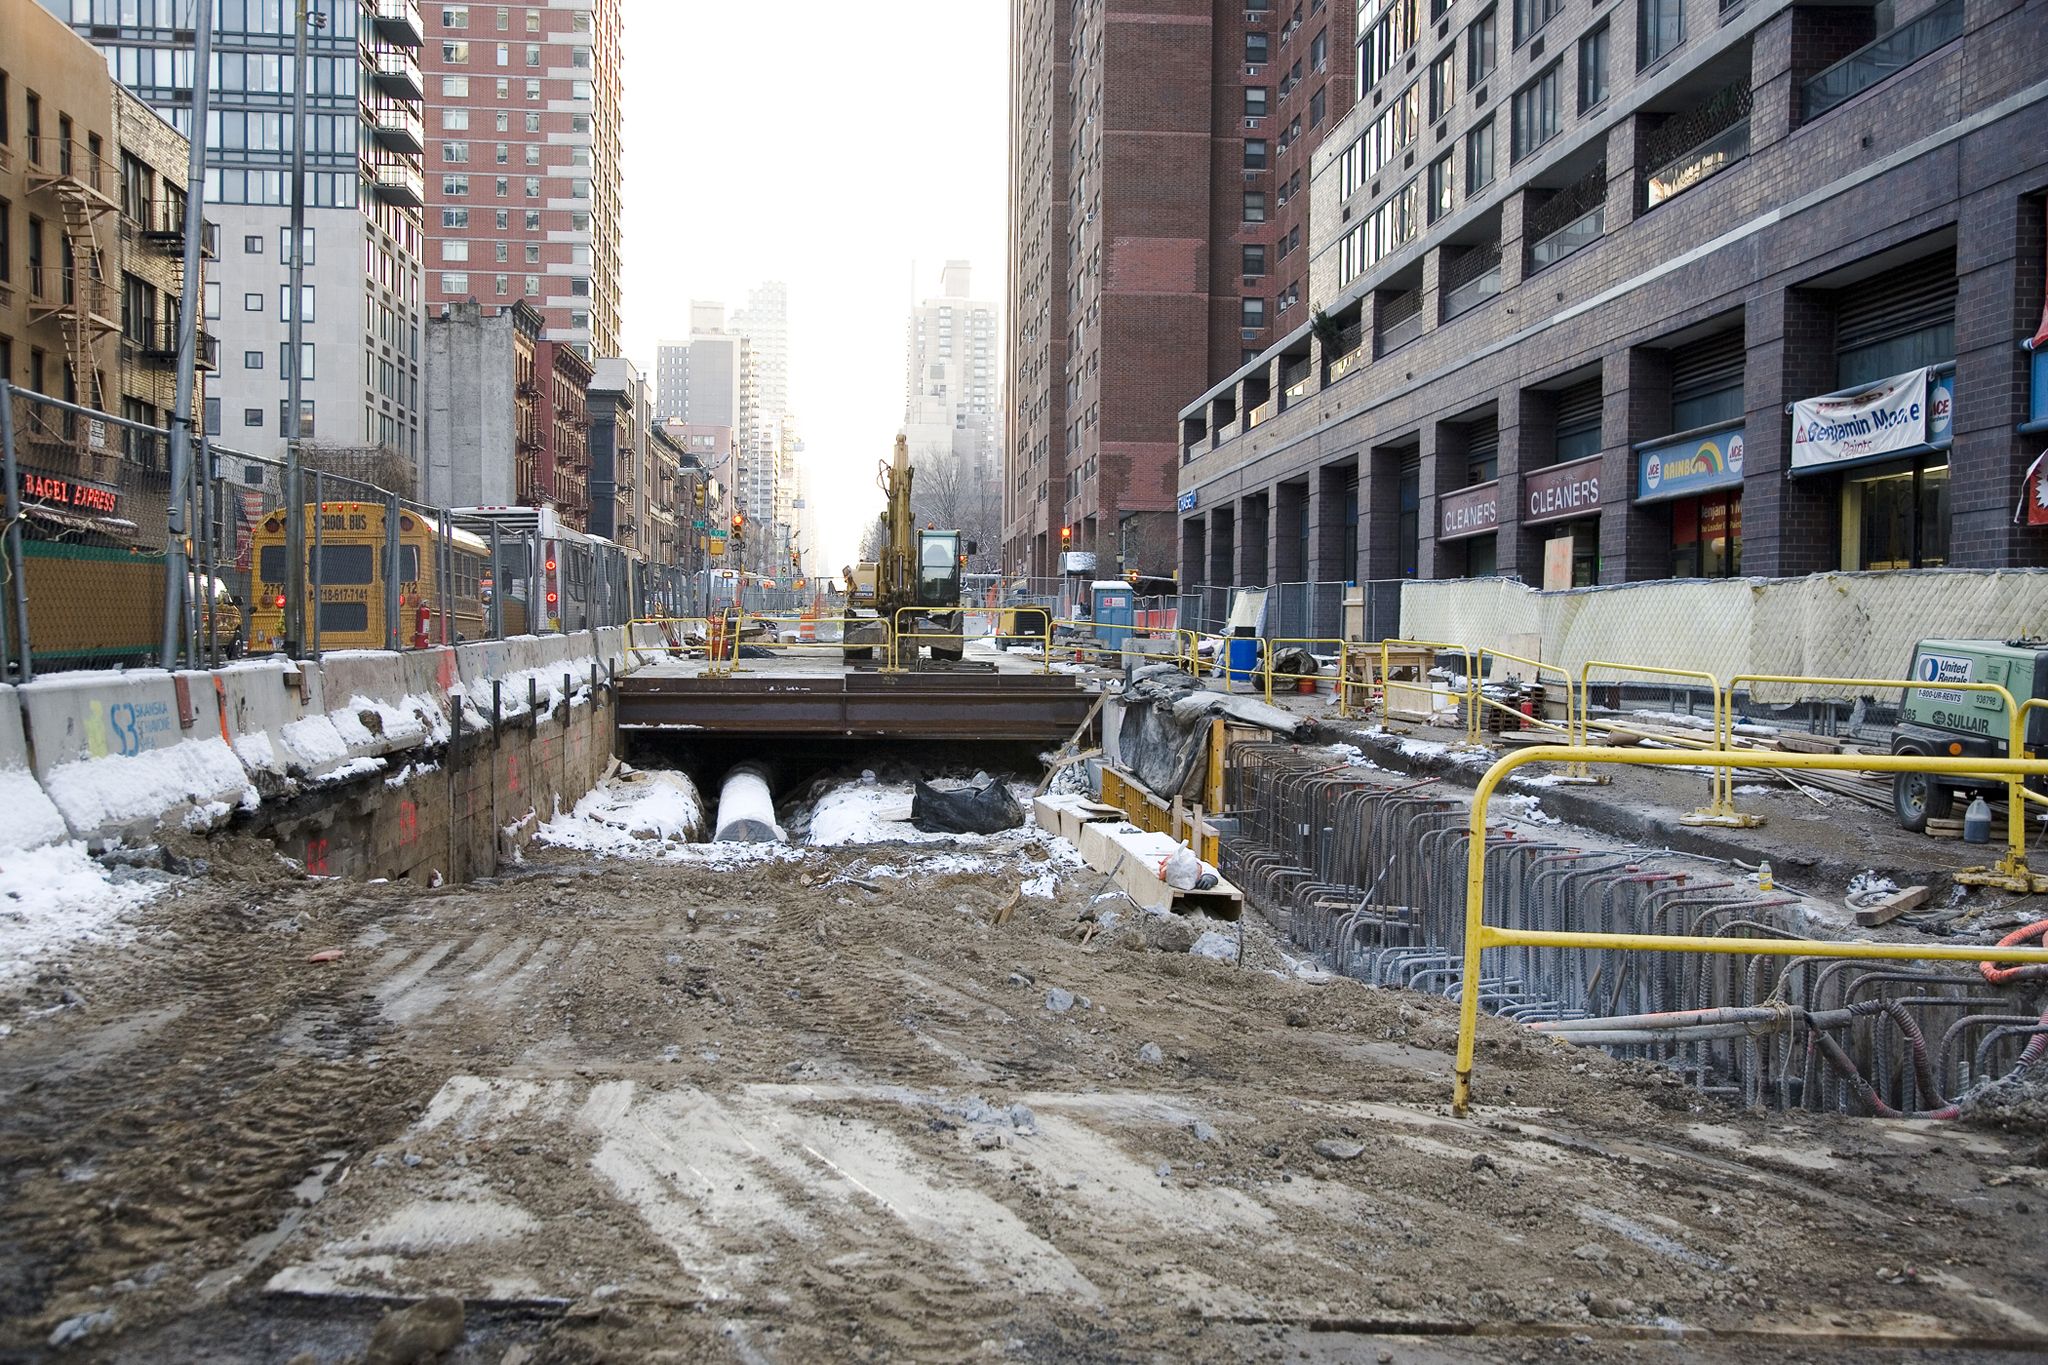 Landlords dig Second Ave. subway | Crain's New York Business